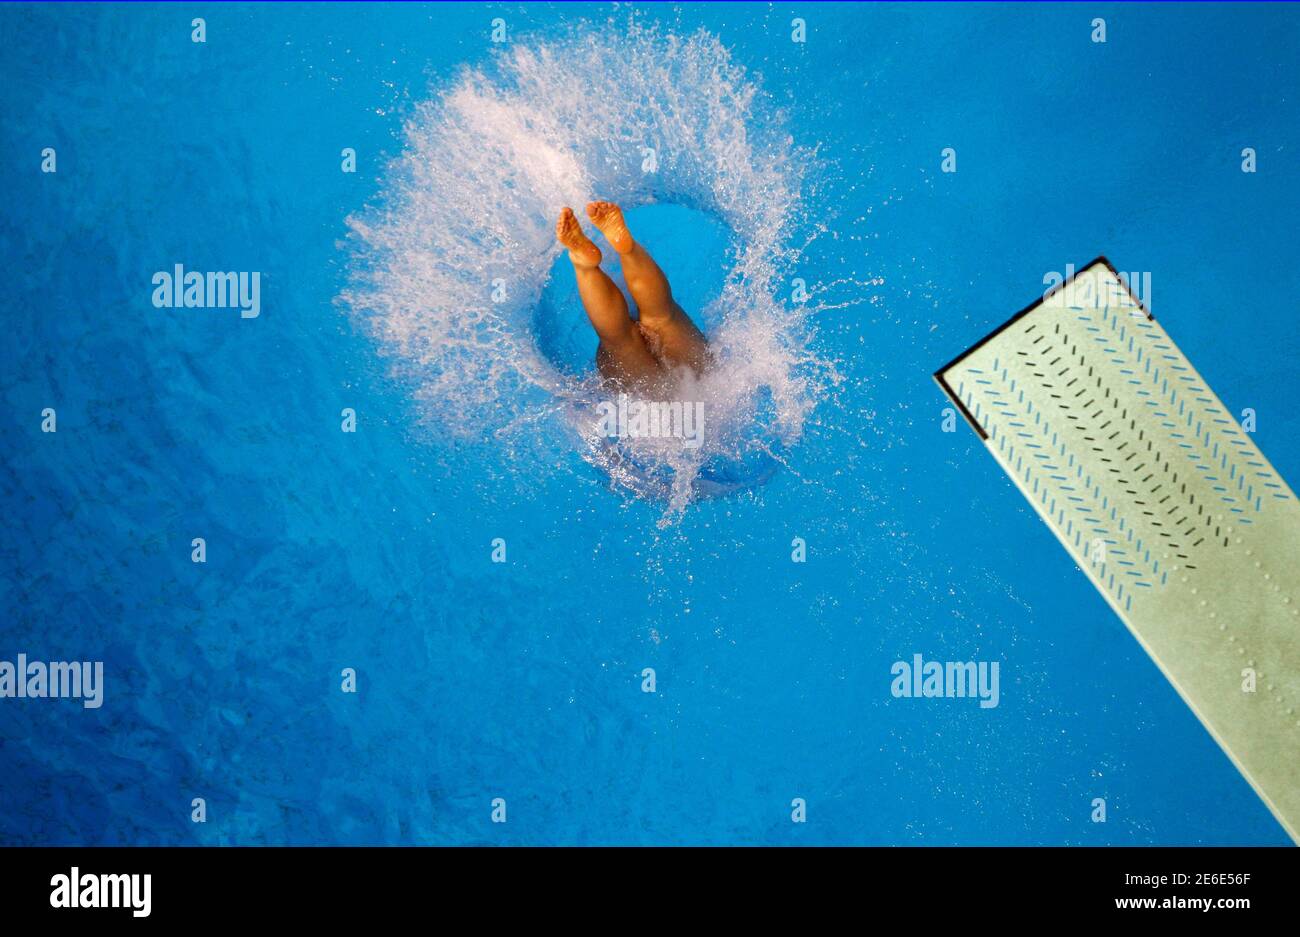 A competitor dives during practice before the women's synchronised 3m springboard diving final at the 16th Asian Games in Guangzhou, Guangdong province, November 22, 2010.    REUTERS/Jason Lee (CHINA  - Tags: SPORT DIVING) Stock Photo